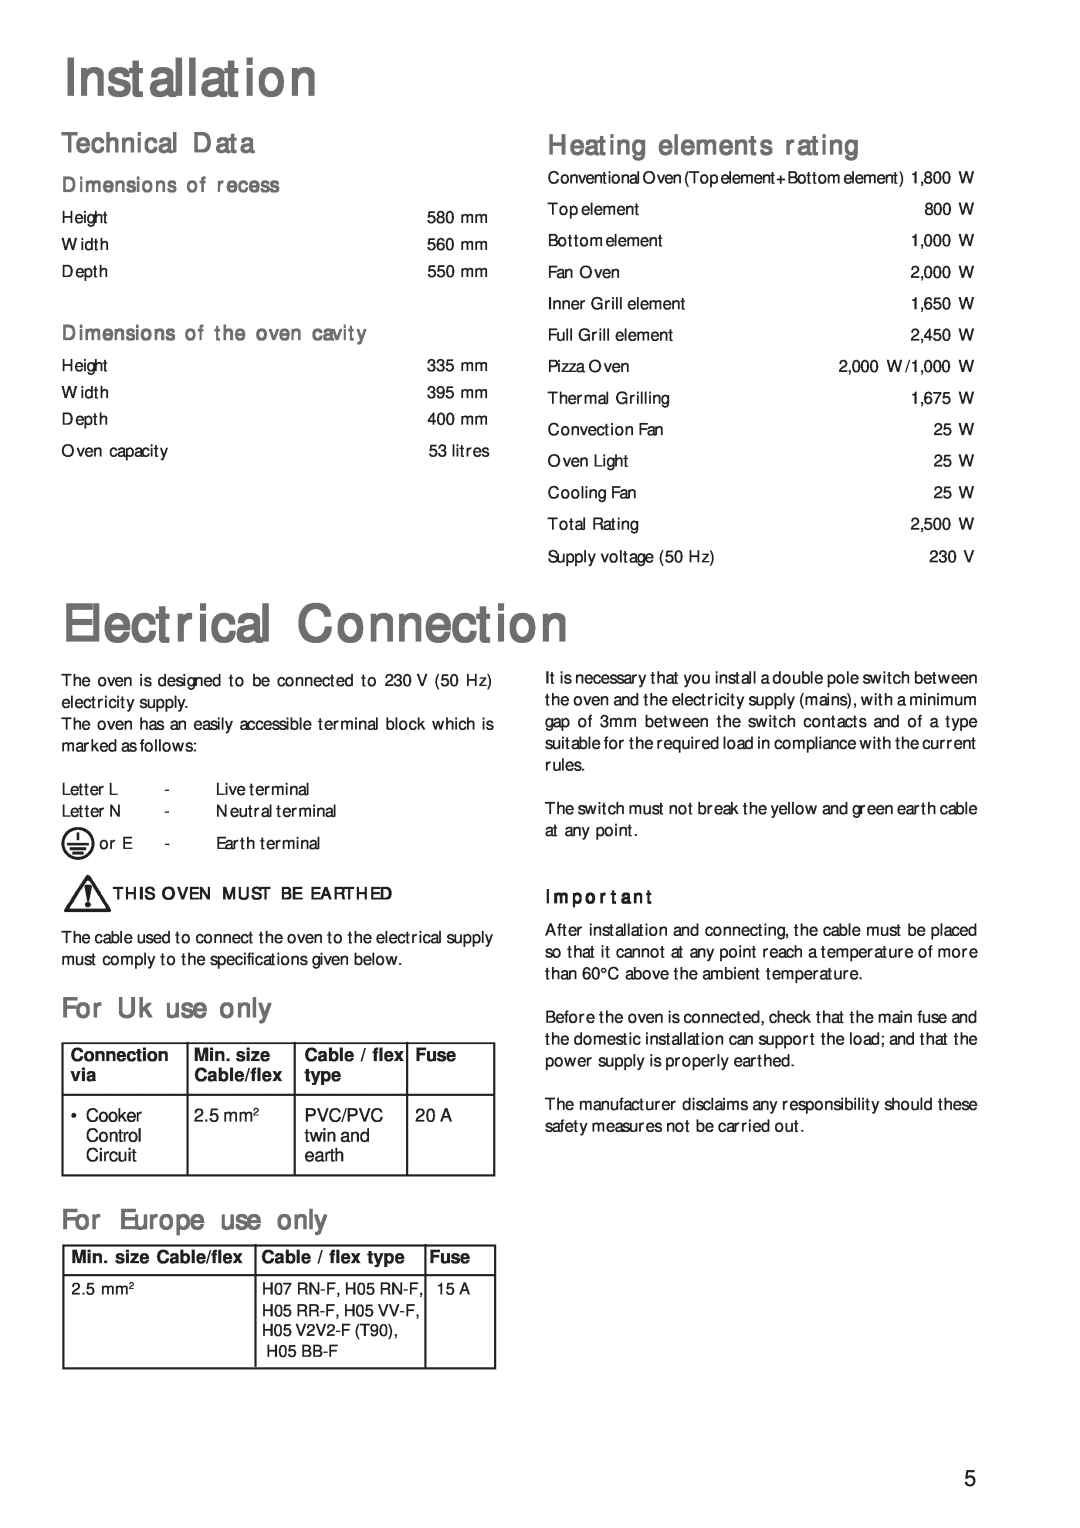 John Lewis JLBIOS602 Installation, Electrical Connection, Technical Data, Heating elements rating, For Uk use only, Fuse 